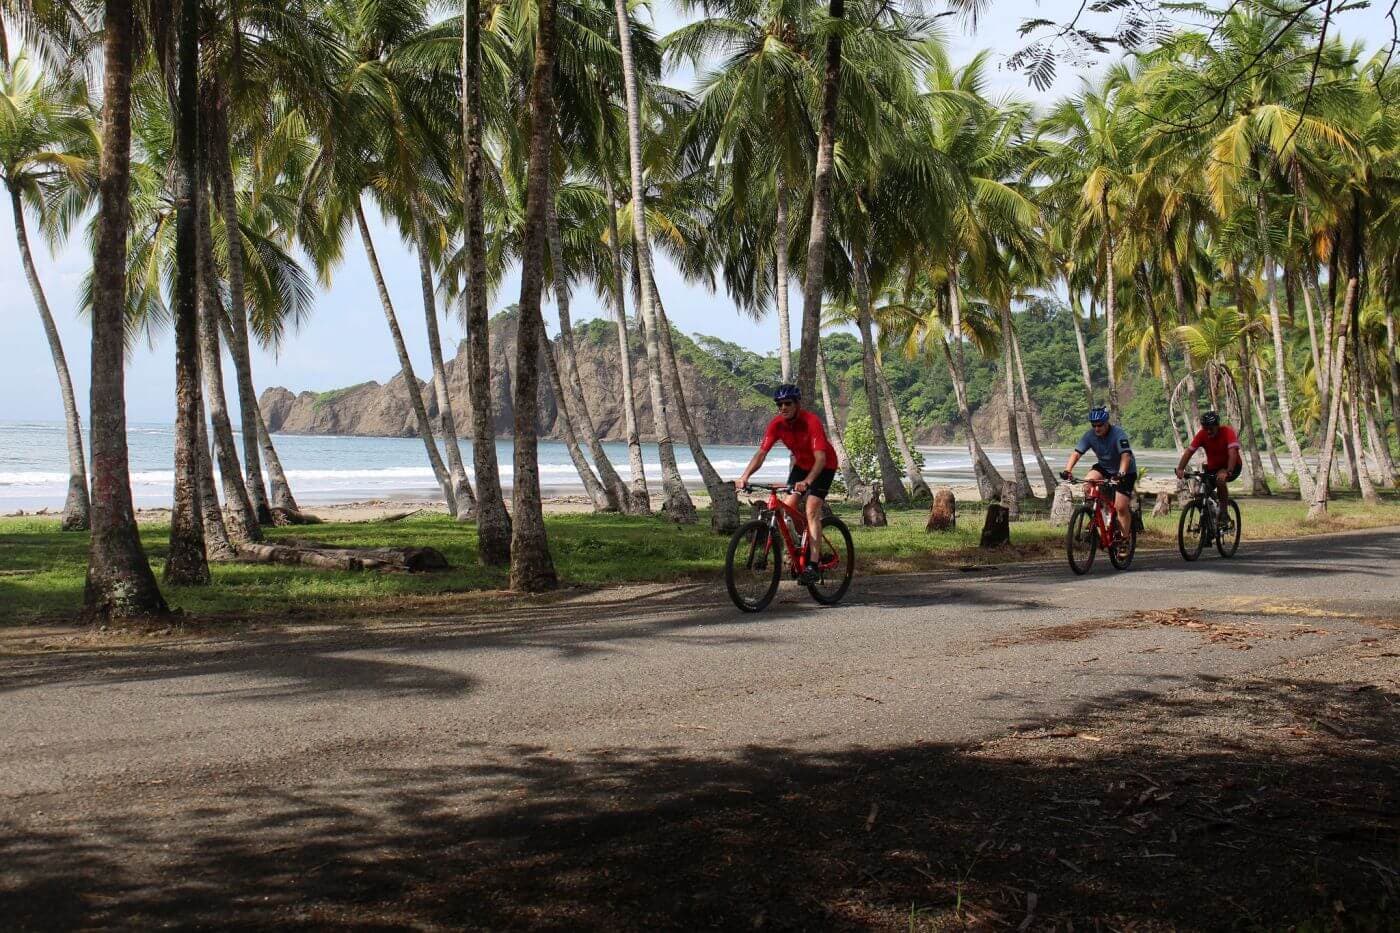 The cyclists cycling in Weligama beachside in Sri Lanka